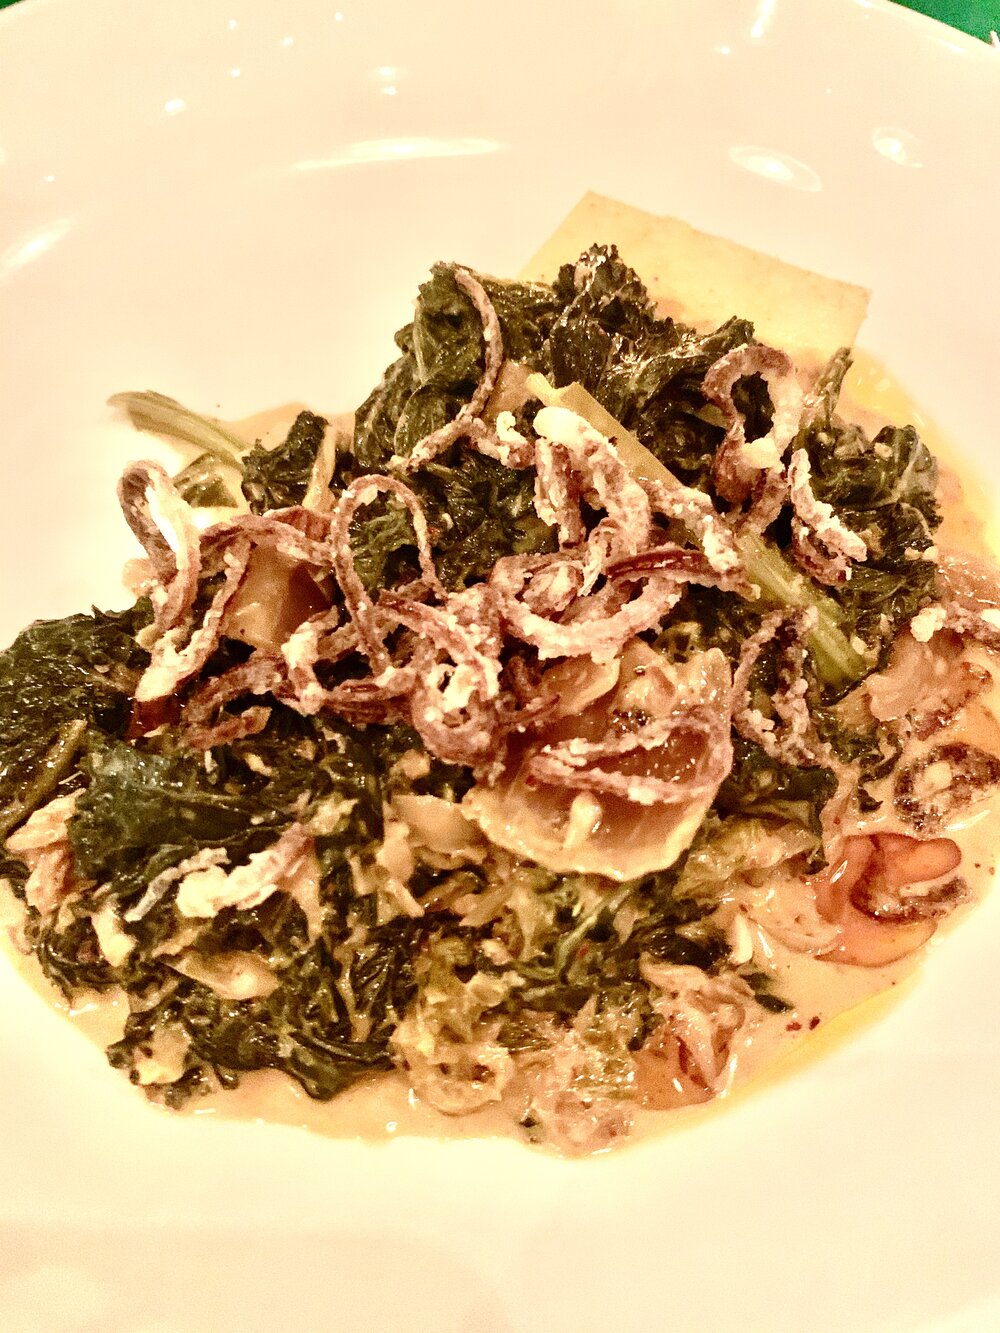 Creamed Kale with fried shallots on a polenta cake is rich and delicious, share with your table mates